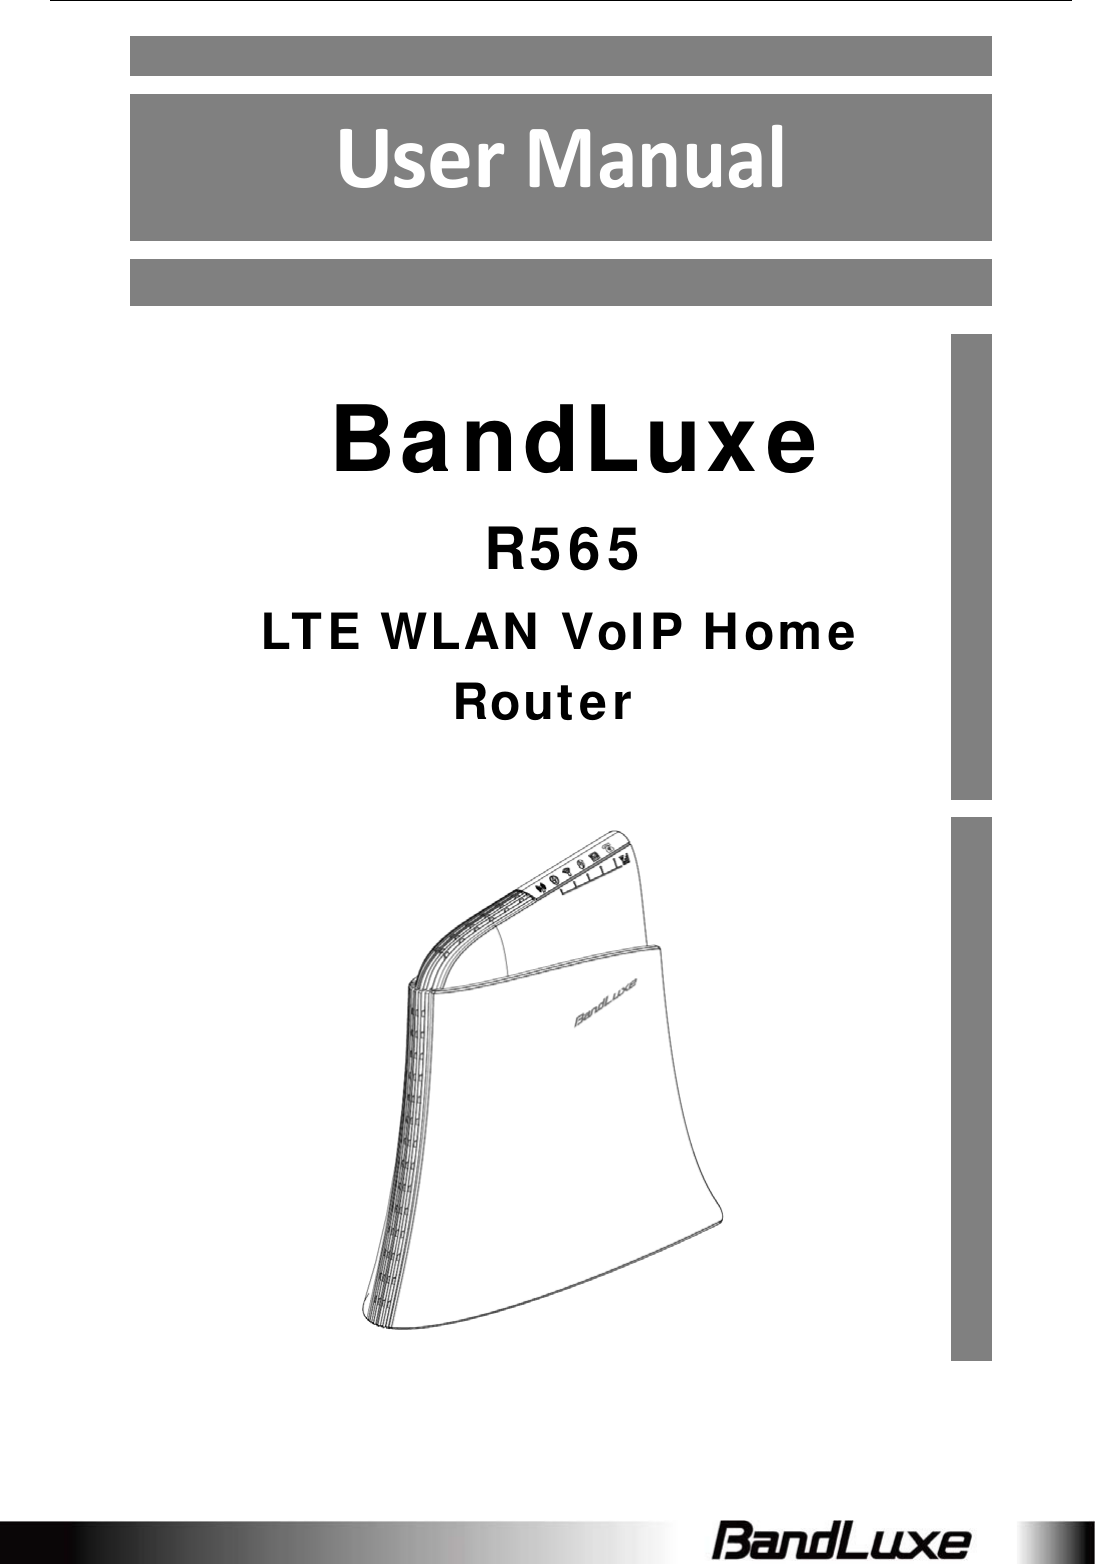   UserManual   BandLuxe R565 LTE WLAN VoIP Home Router 